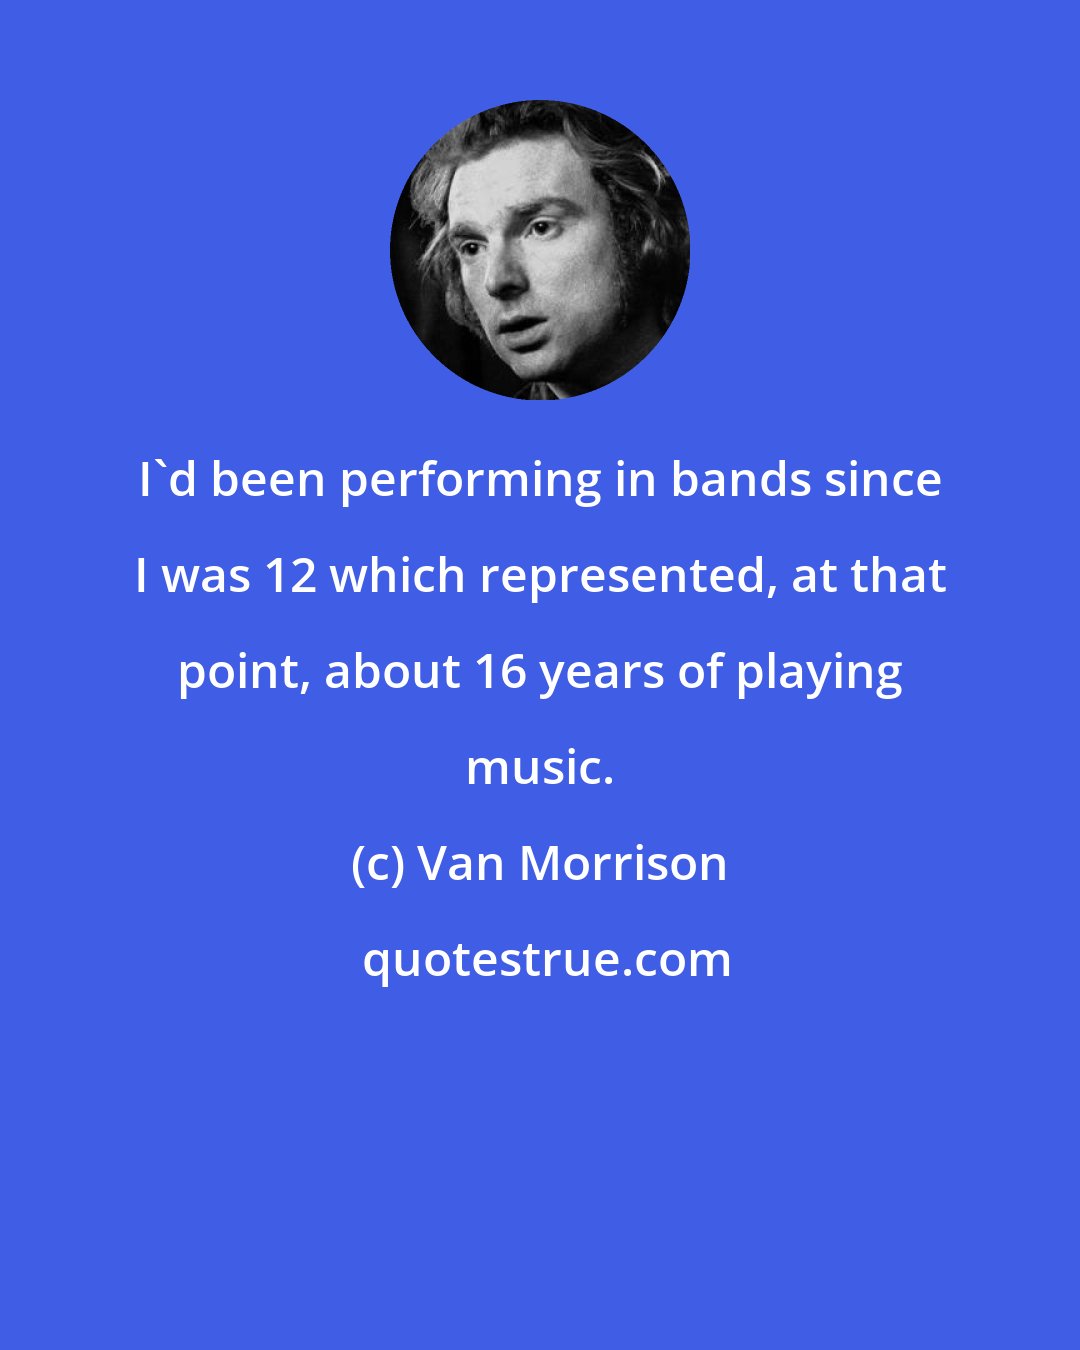 Van Morrison: I'd been performing in bands since I was 12 which represented, at that point, about 16 years of playing music.